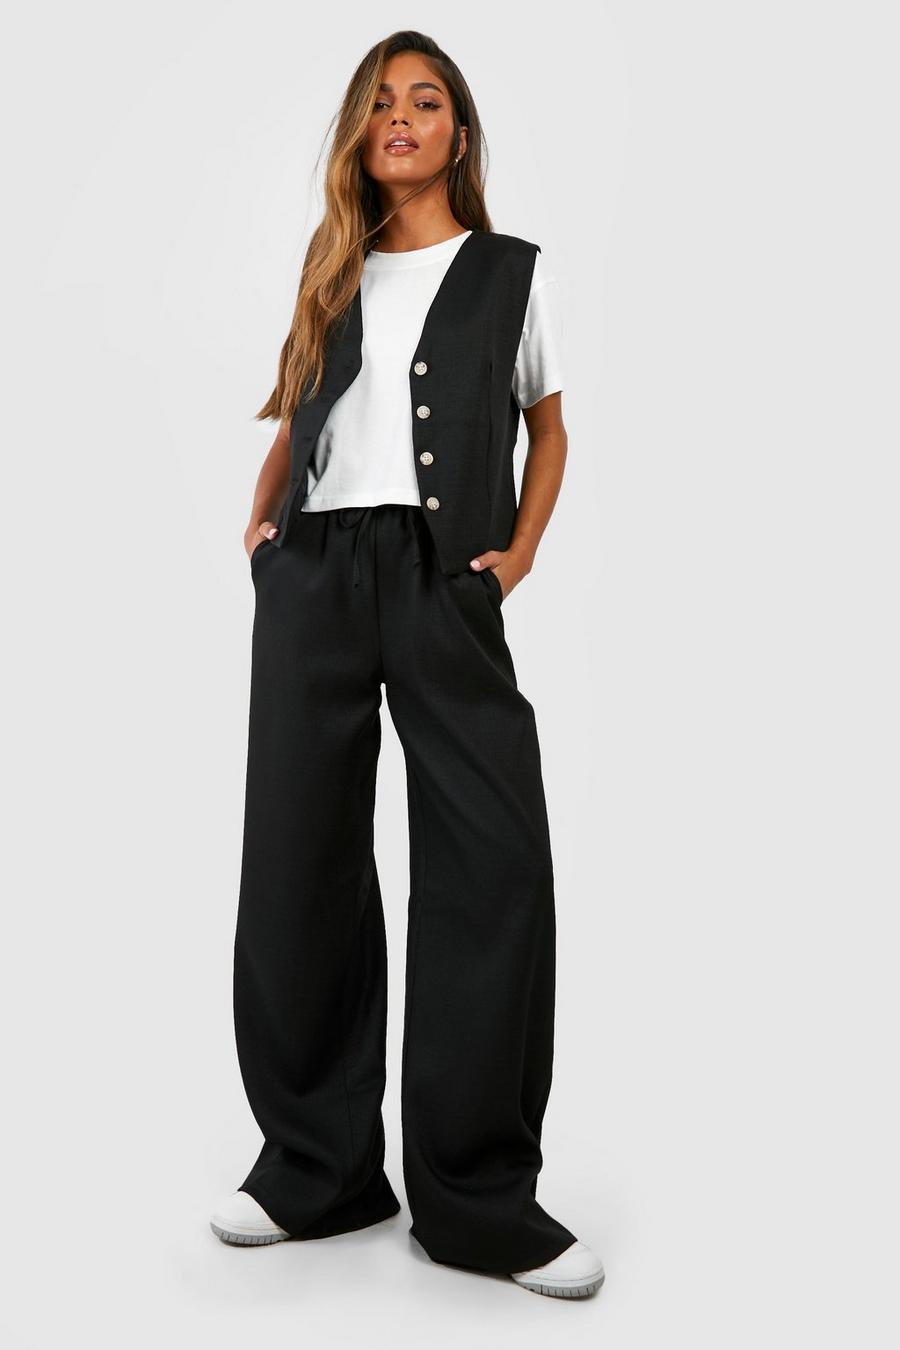 Looney Woven Textured Linen Look Elasticated Waist Trousers May 